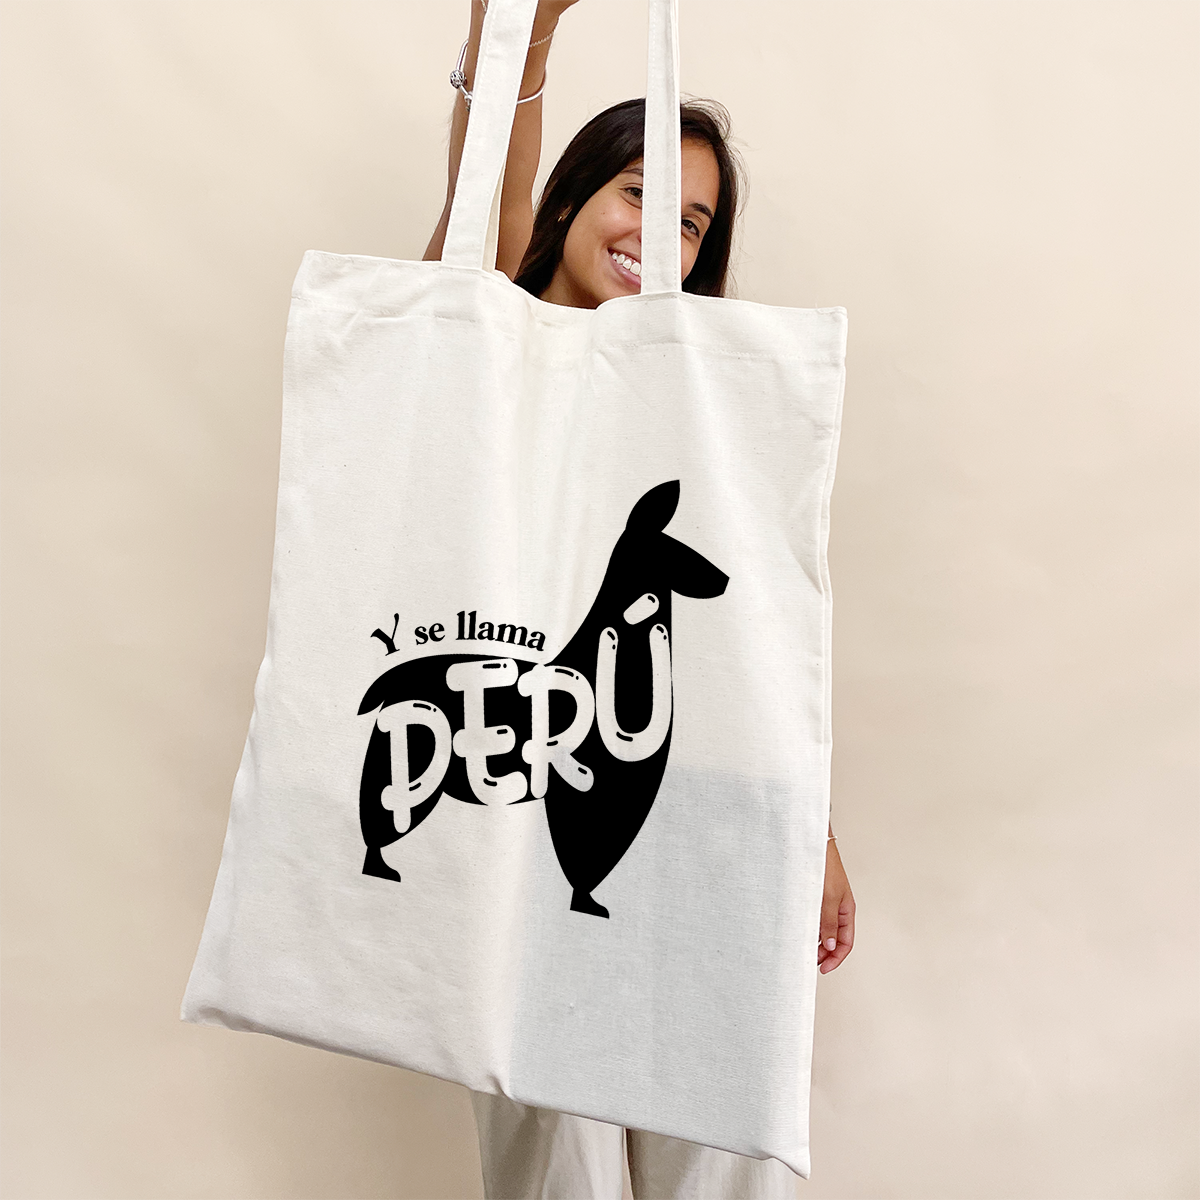 Load image into Gallery viewer, Tote Bag Perú
